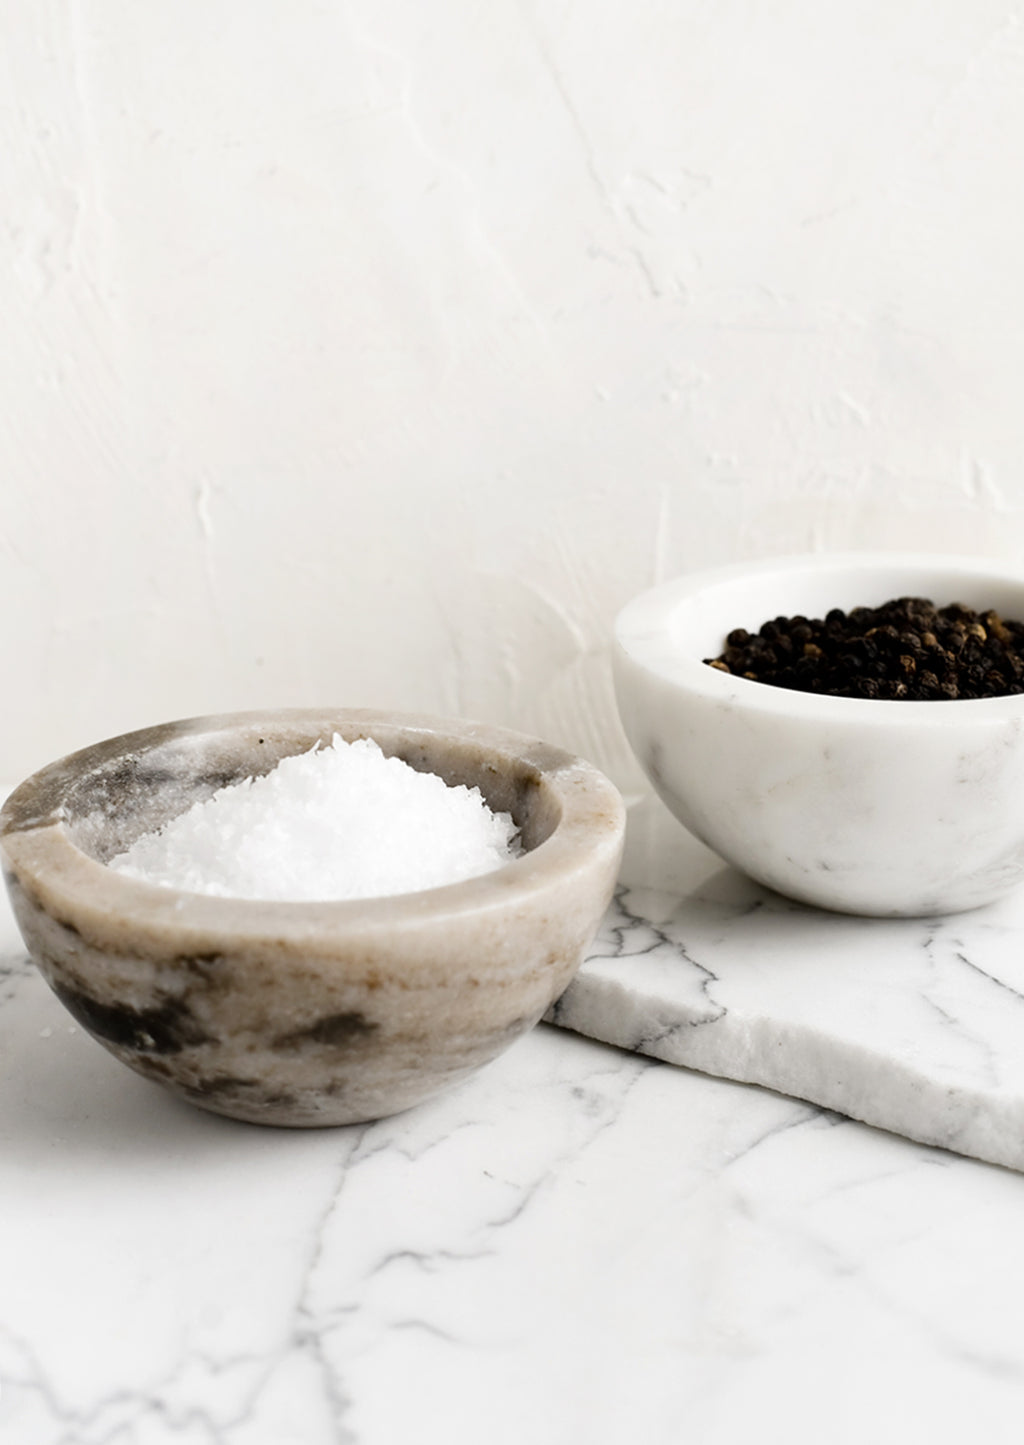 2: Tan and white marble bowls holding salt and pepper.